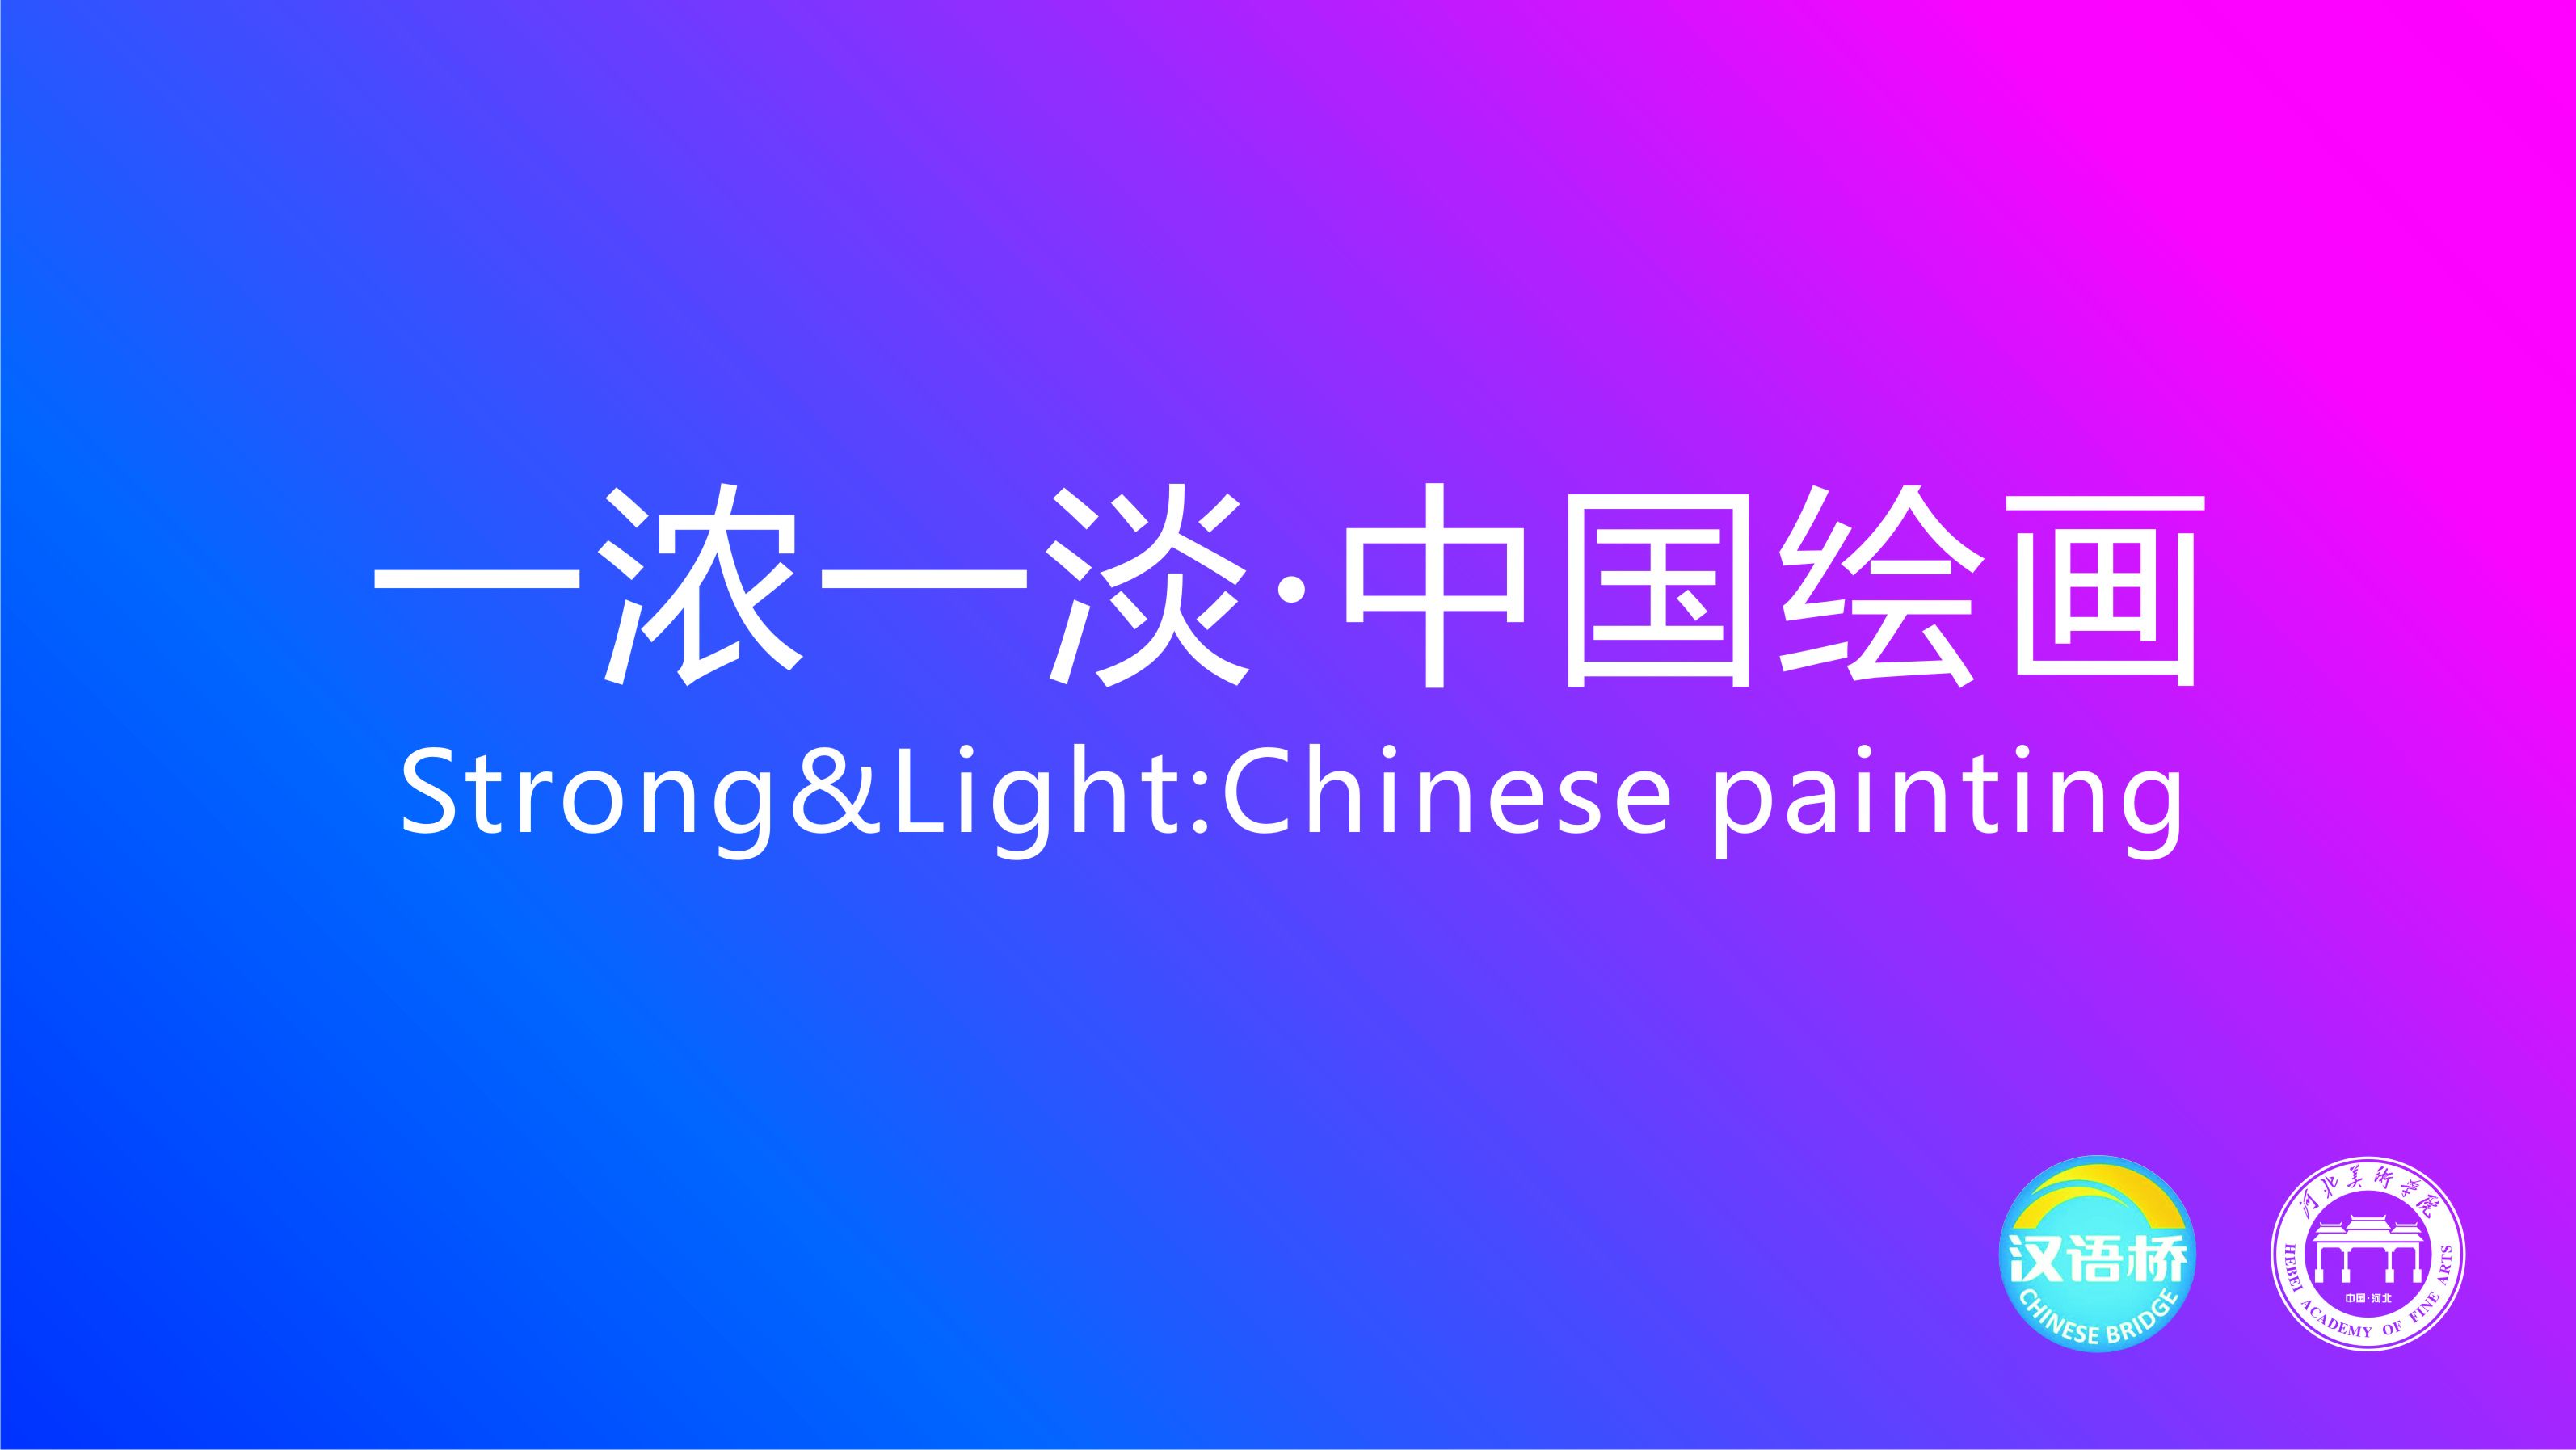 Strong&Light:Chinese painting